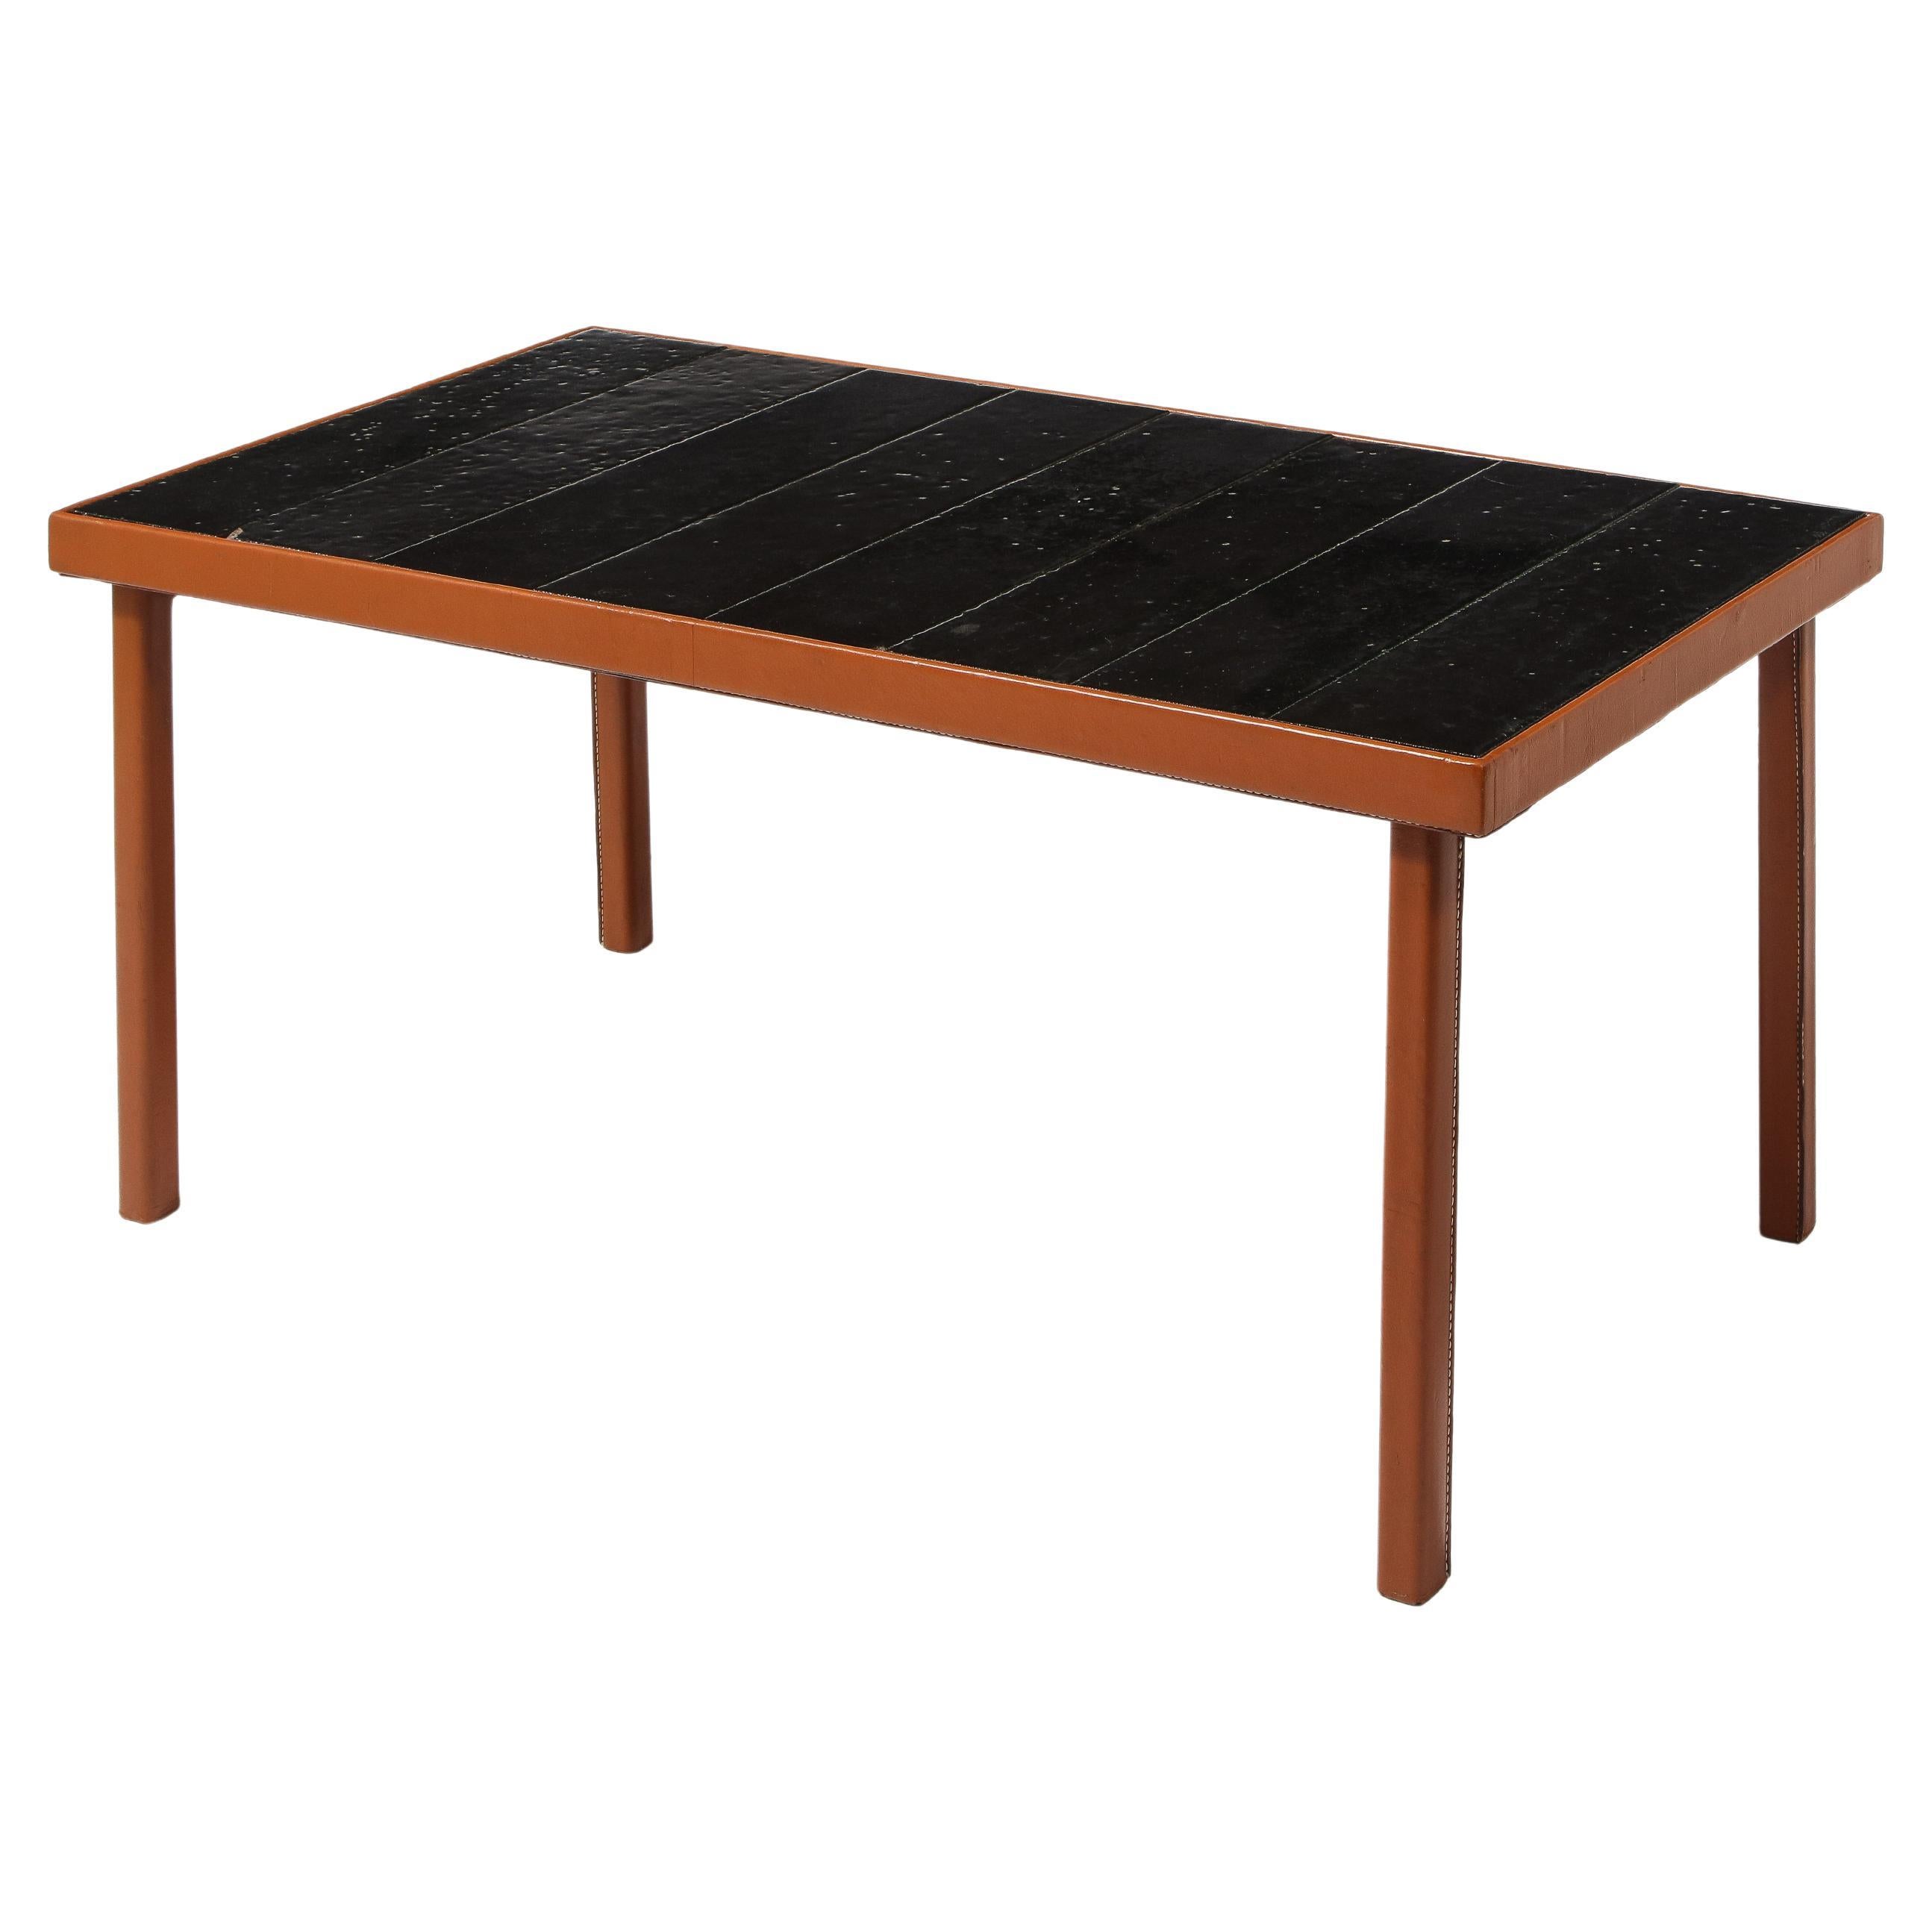 Adnet Style Leather & Dark Jouve Style Lava Stone Tiles Table, France 1950's For Sale